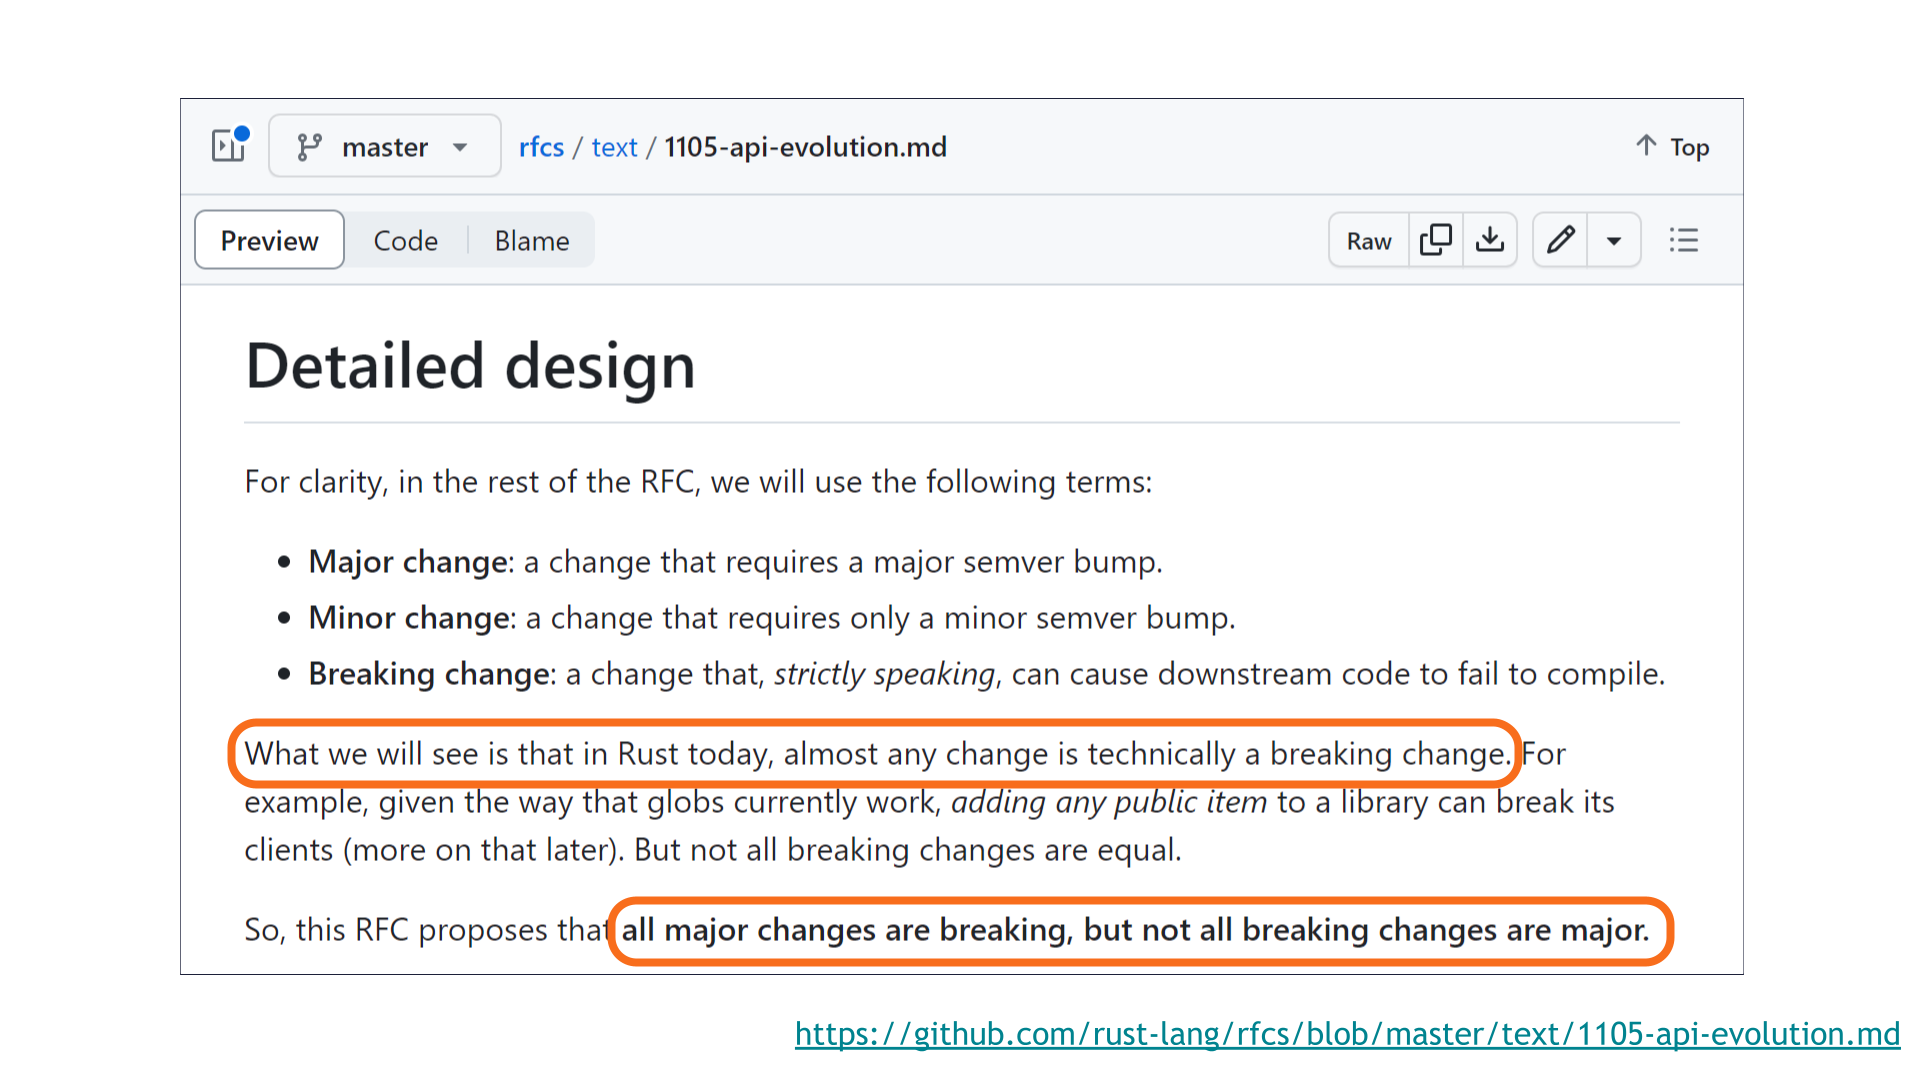 Screenshot from Rust's "API evolution" RFC 1105. It defines the terms "major change" and "minor change" as requiring a major and minor SemVer bump, respectively, and defines the term "breaking change" to mean a change that strictly speaking can cause downstream code to fail to compile. Of the remaining text, two portions are highlighted: "in Rust today, almost any change is technically a breaking change" and "all major changes are breaking, but not all breaking changes are major."